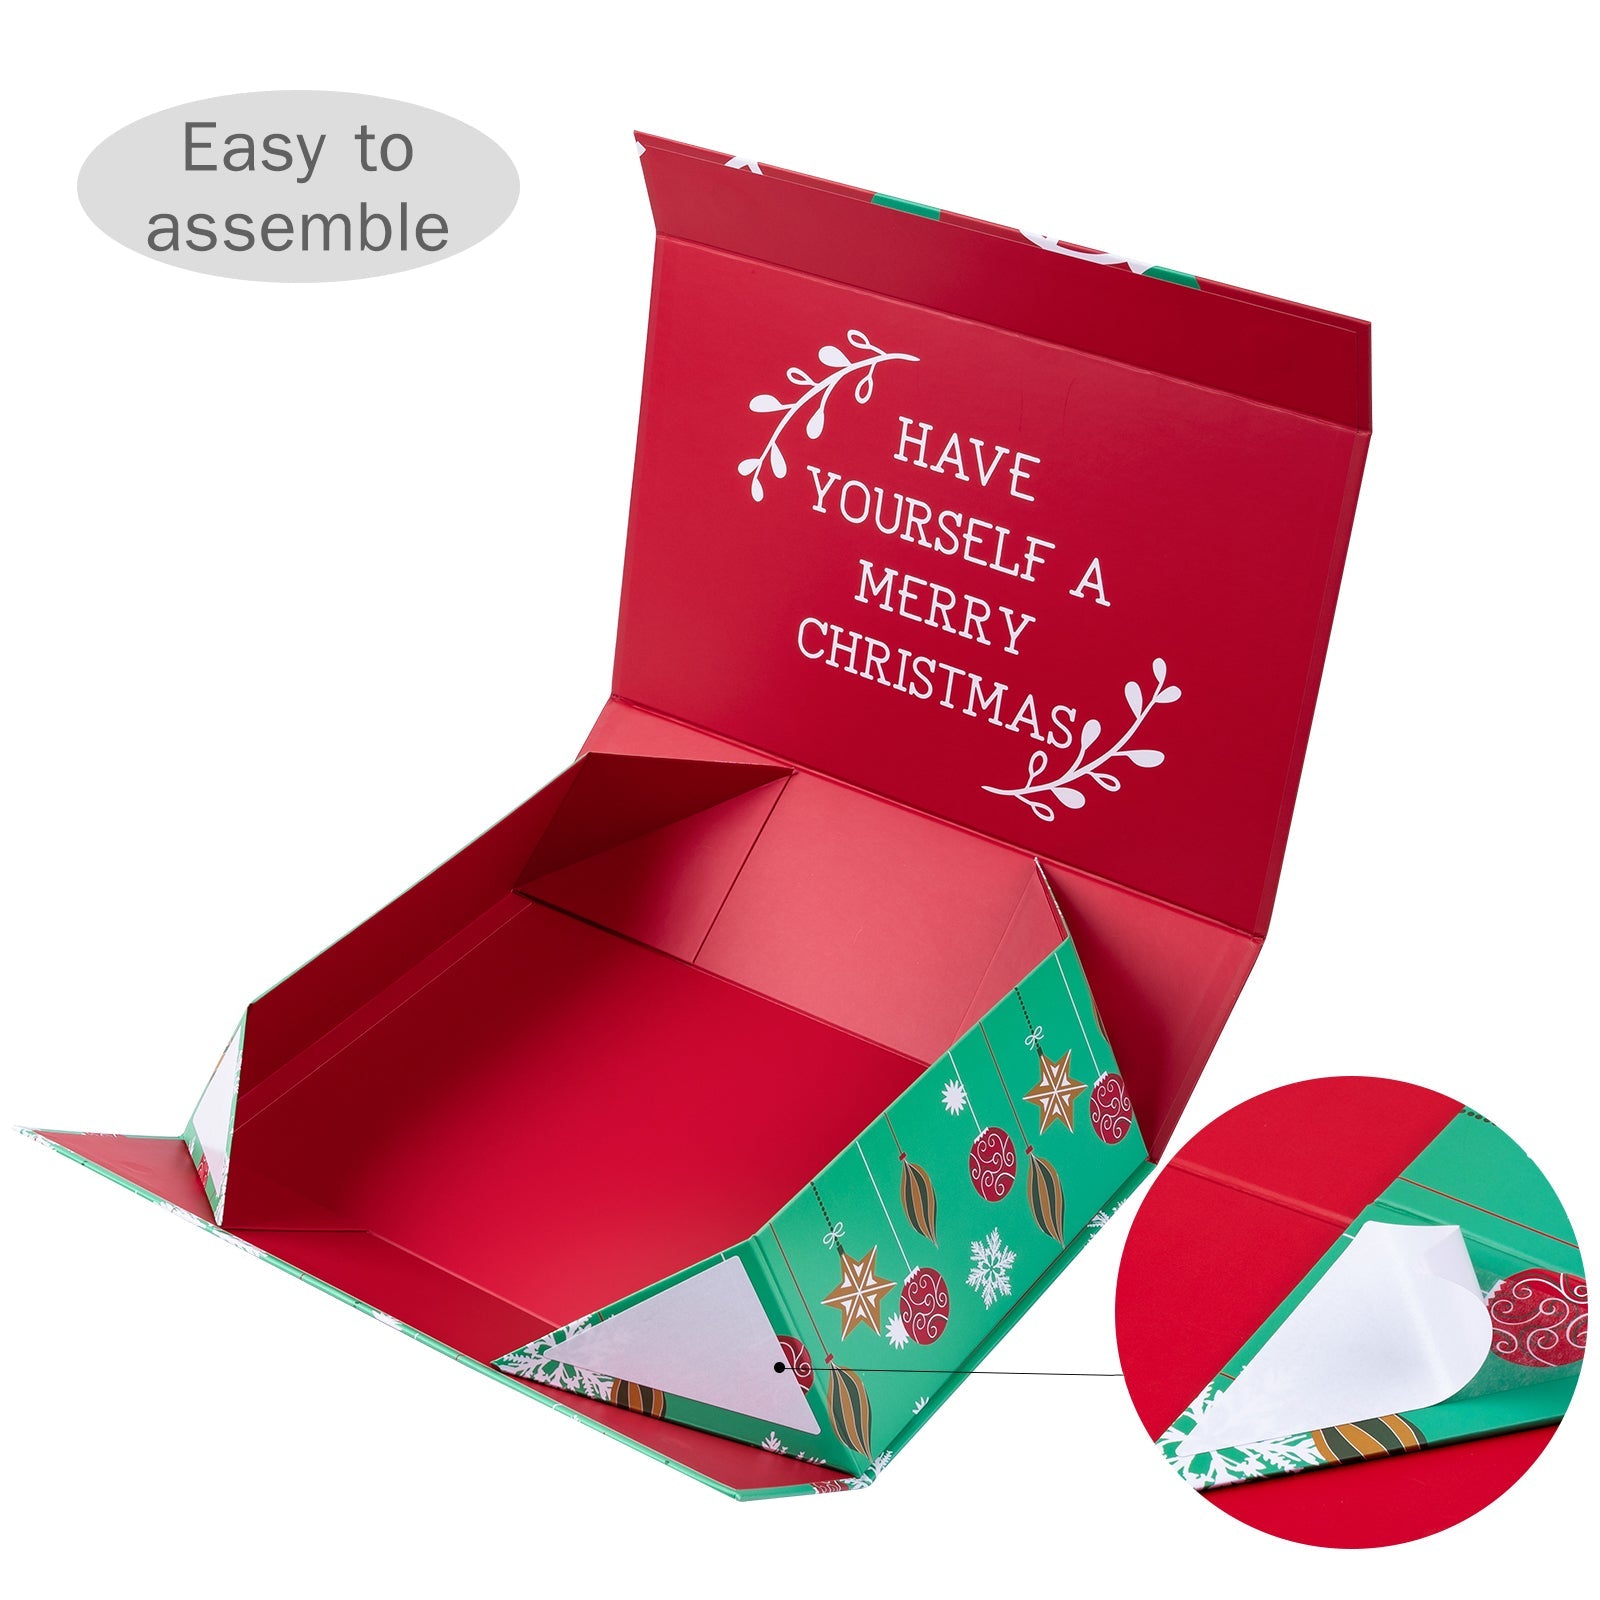 14x9x4.3 inch Collapsible Gift Box with Magnetic Closure - Christmas Ornament